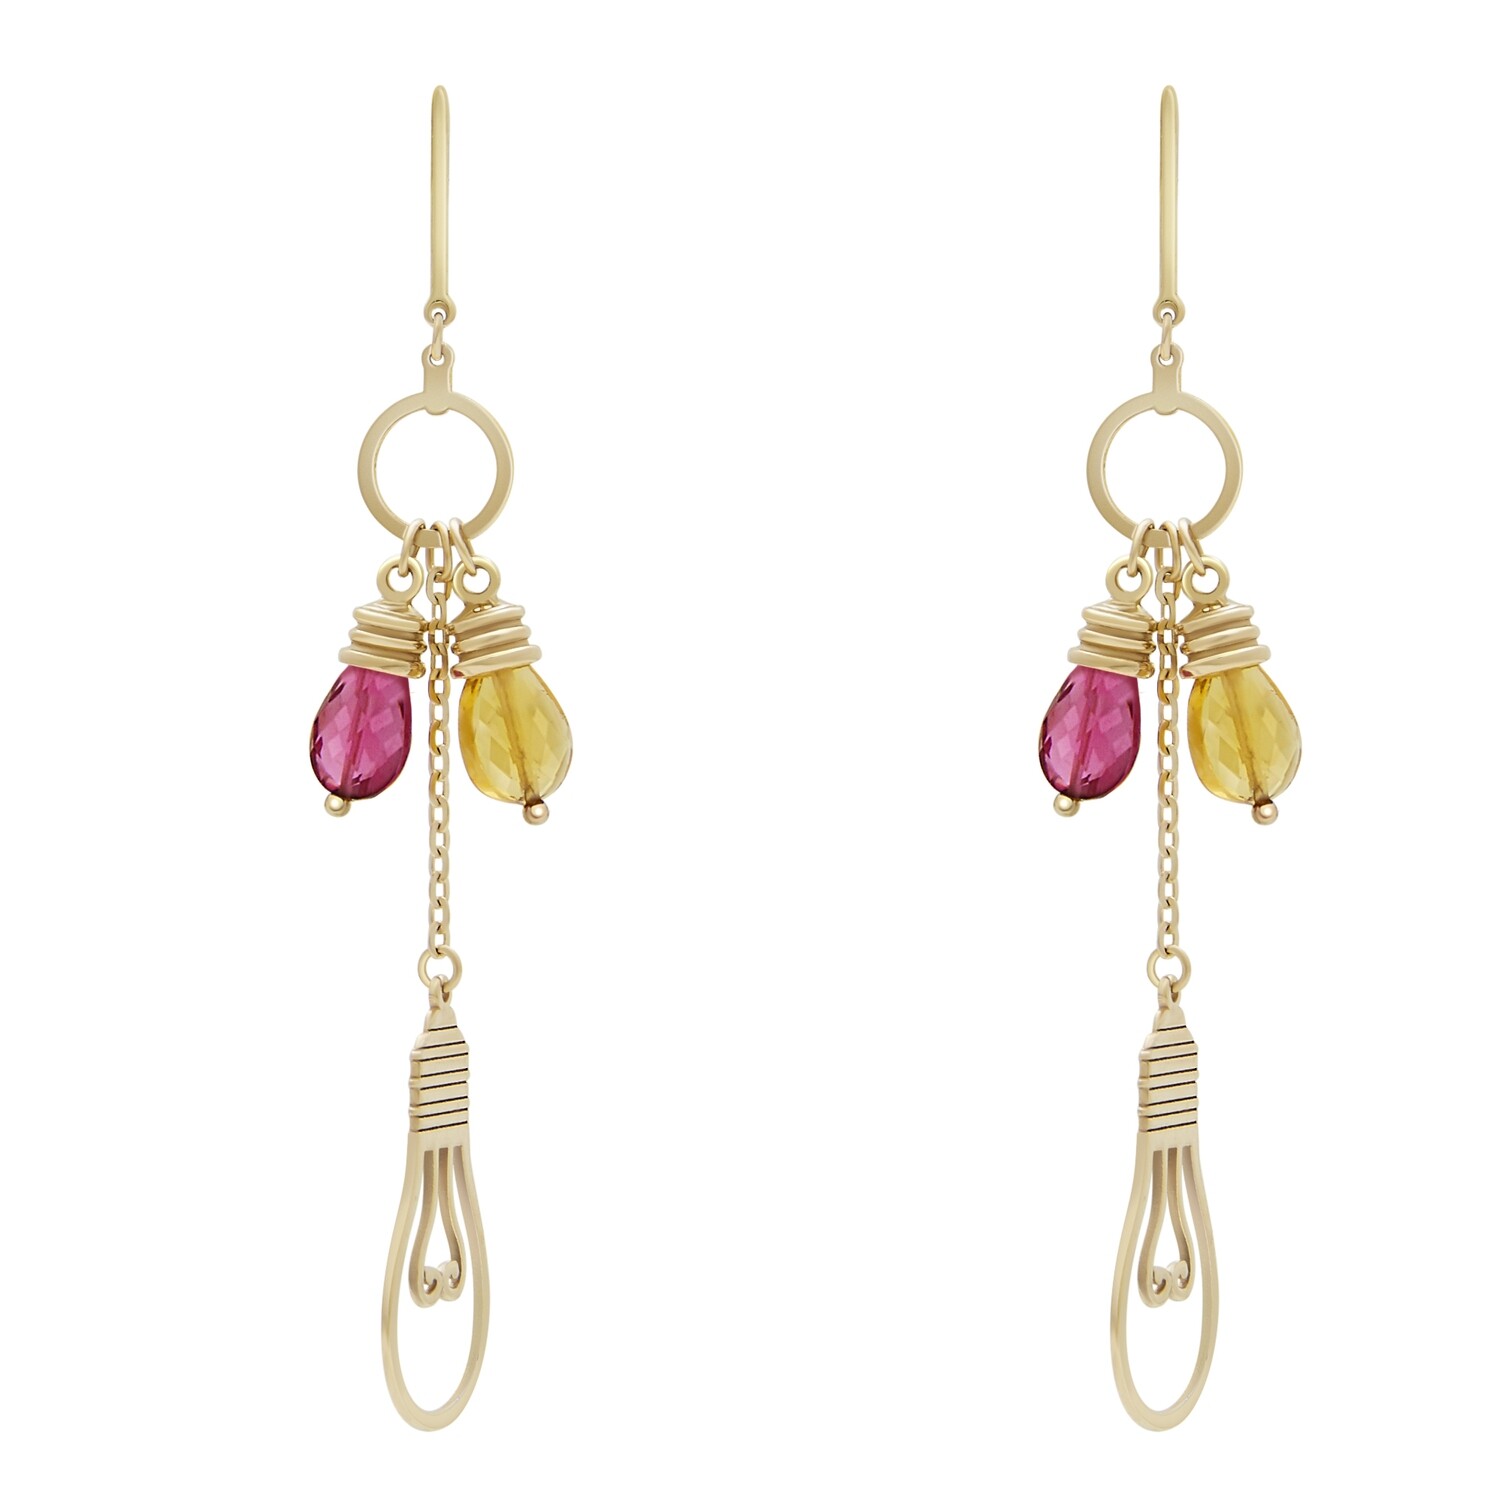 Light Gold Earrings with Colored Stones